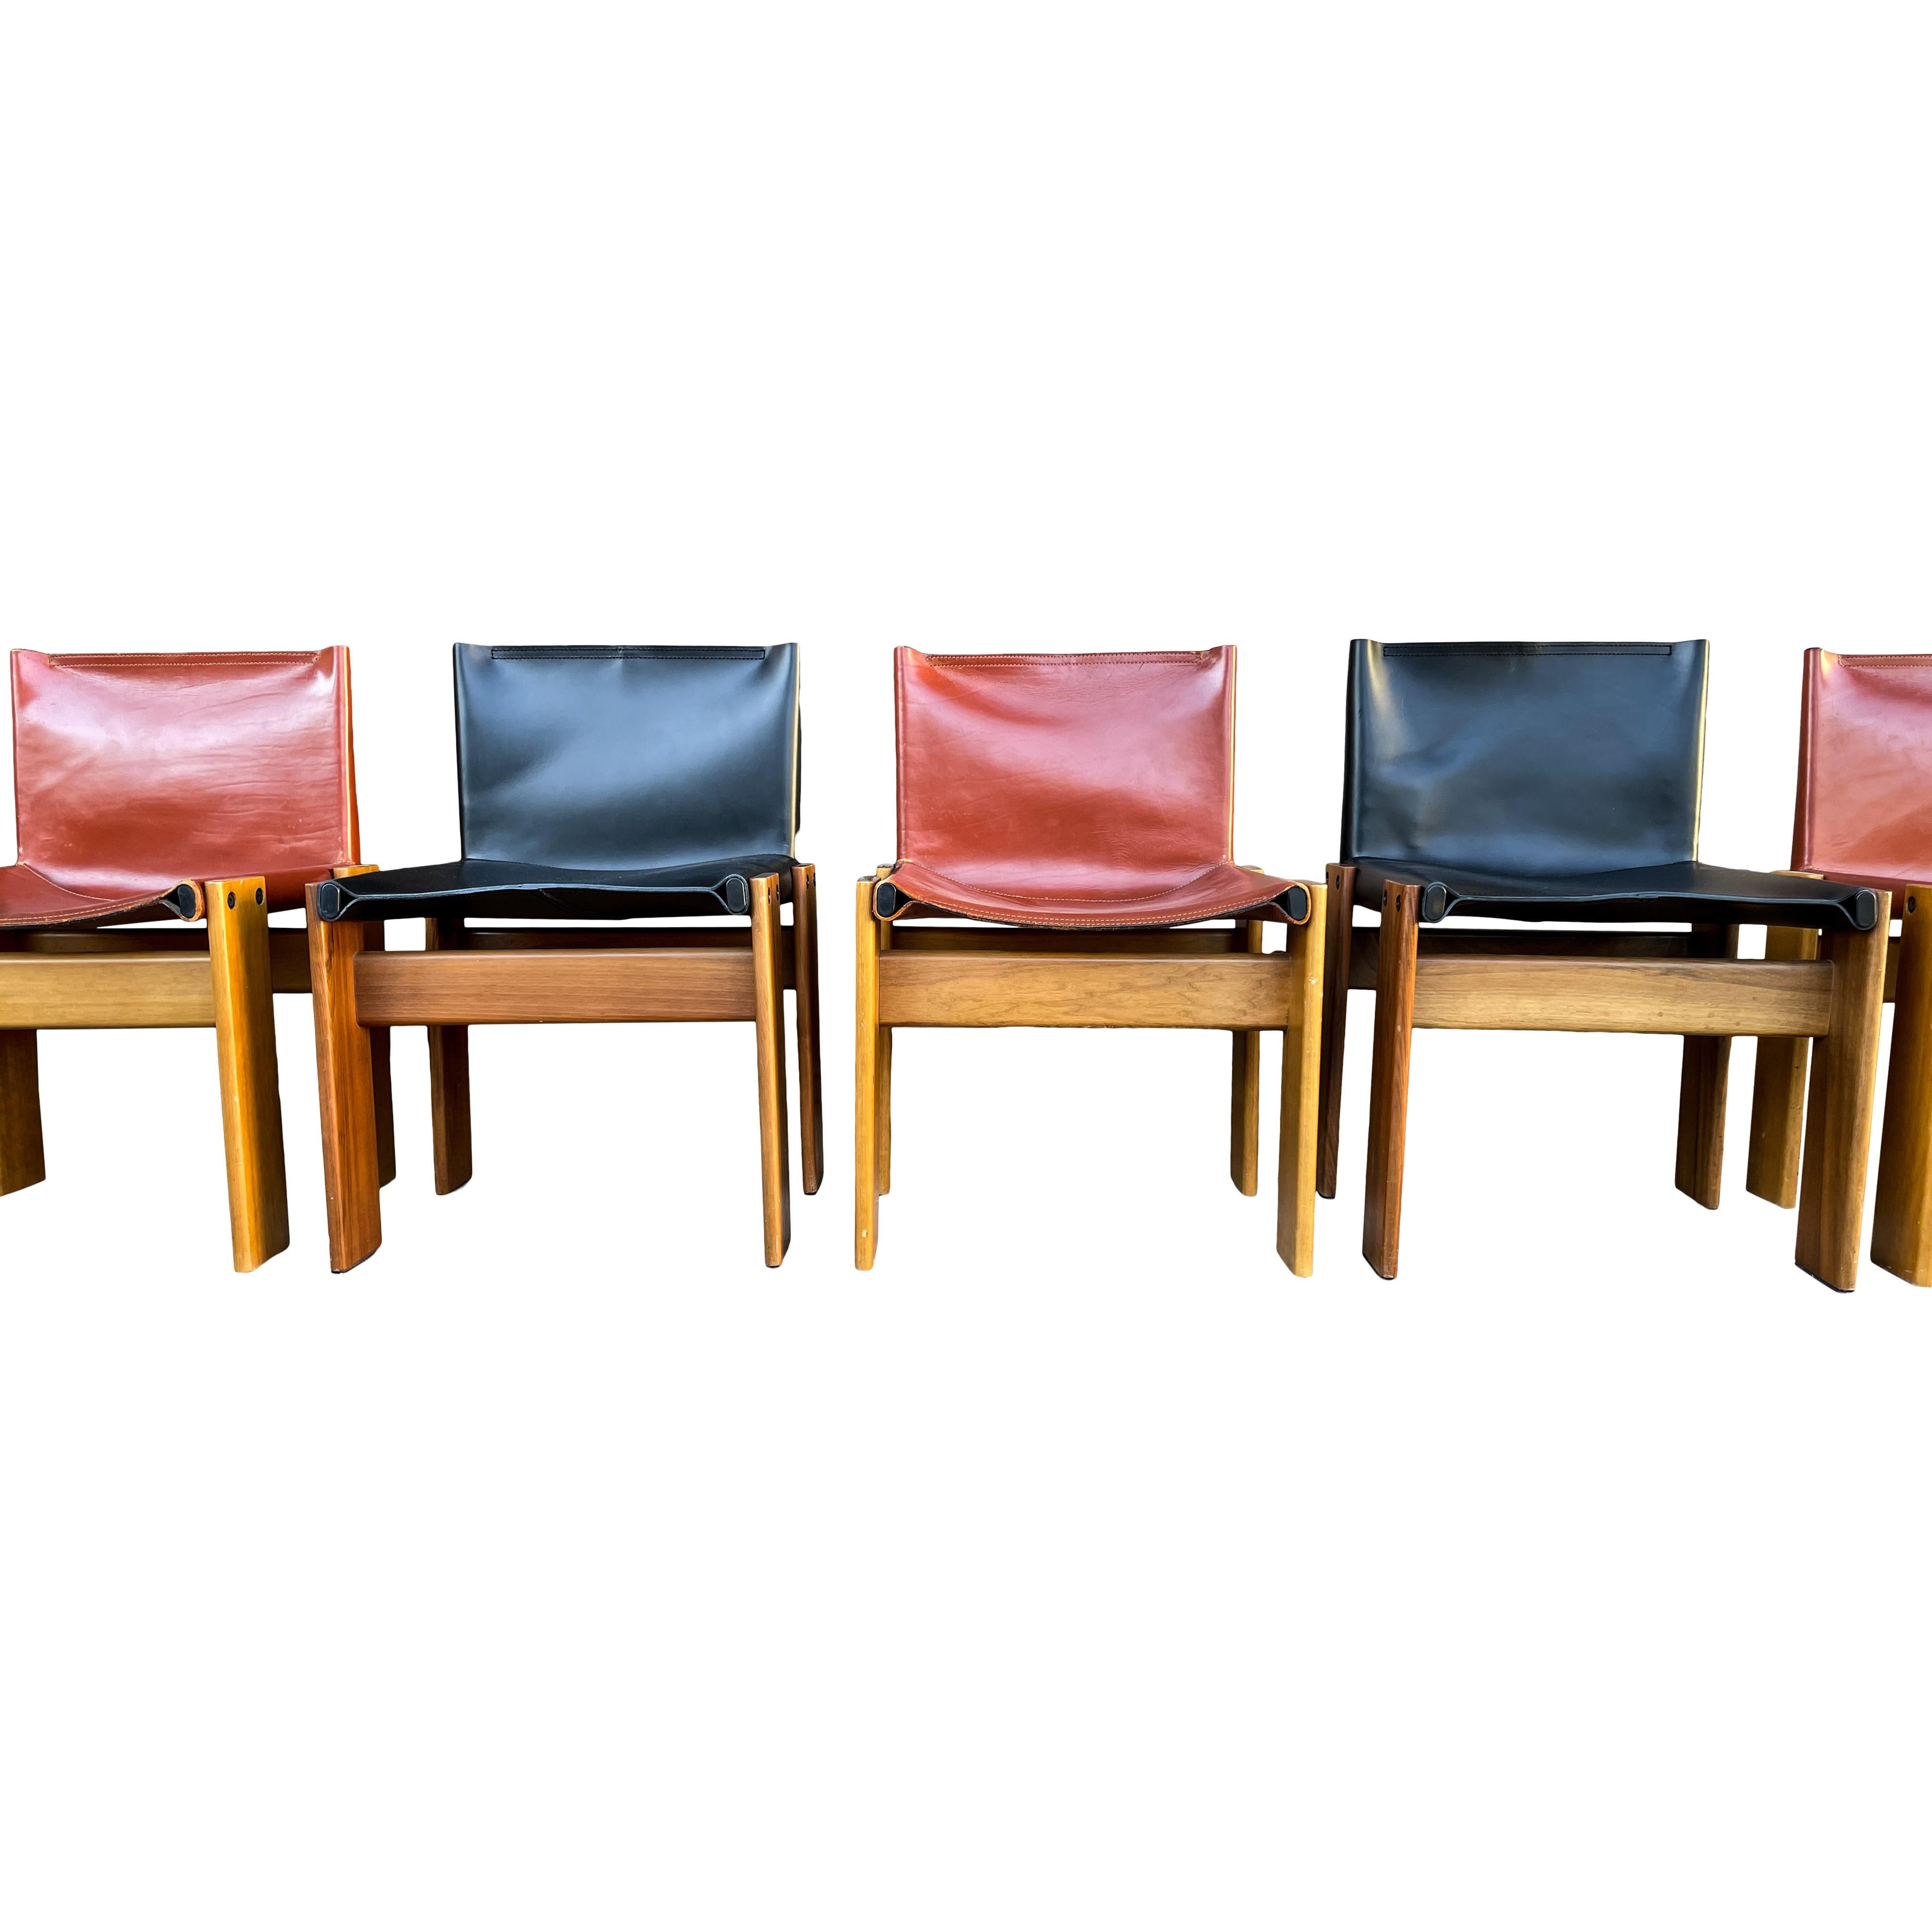 Afra & Tobia Scarpa Brick Leather Monk Dining Chair for Molteni, 1973, Set of 8 For Sale 1